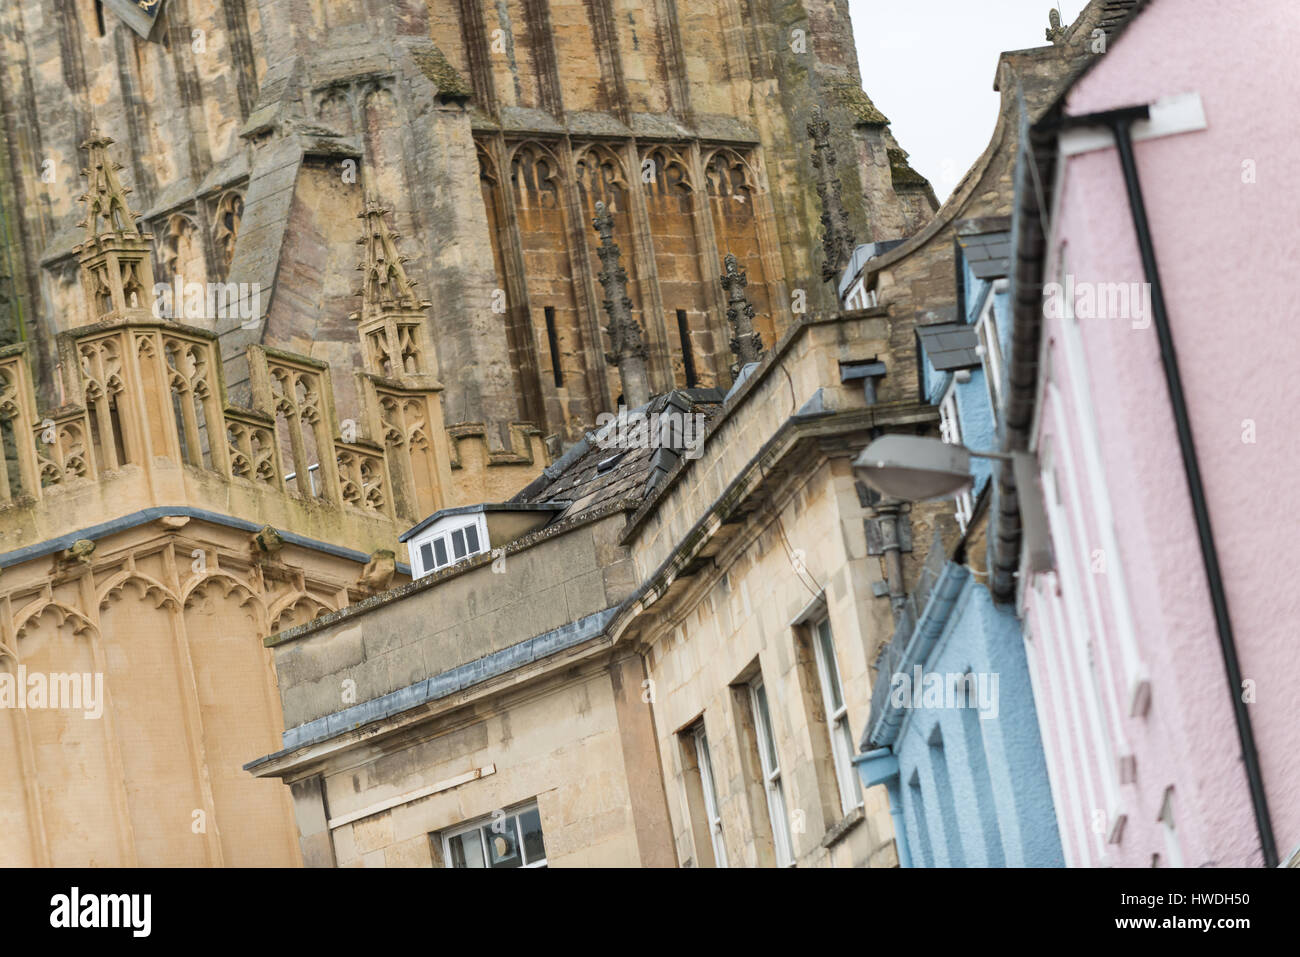 Colourful buildings and St John the Baptist parish church in Market Square, Cirencester in the Cotswolds, Gloucester, England, UK Stock Photo